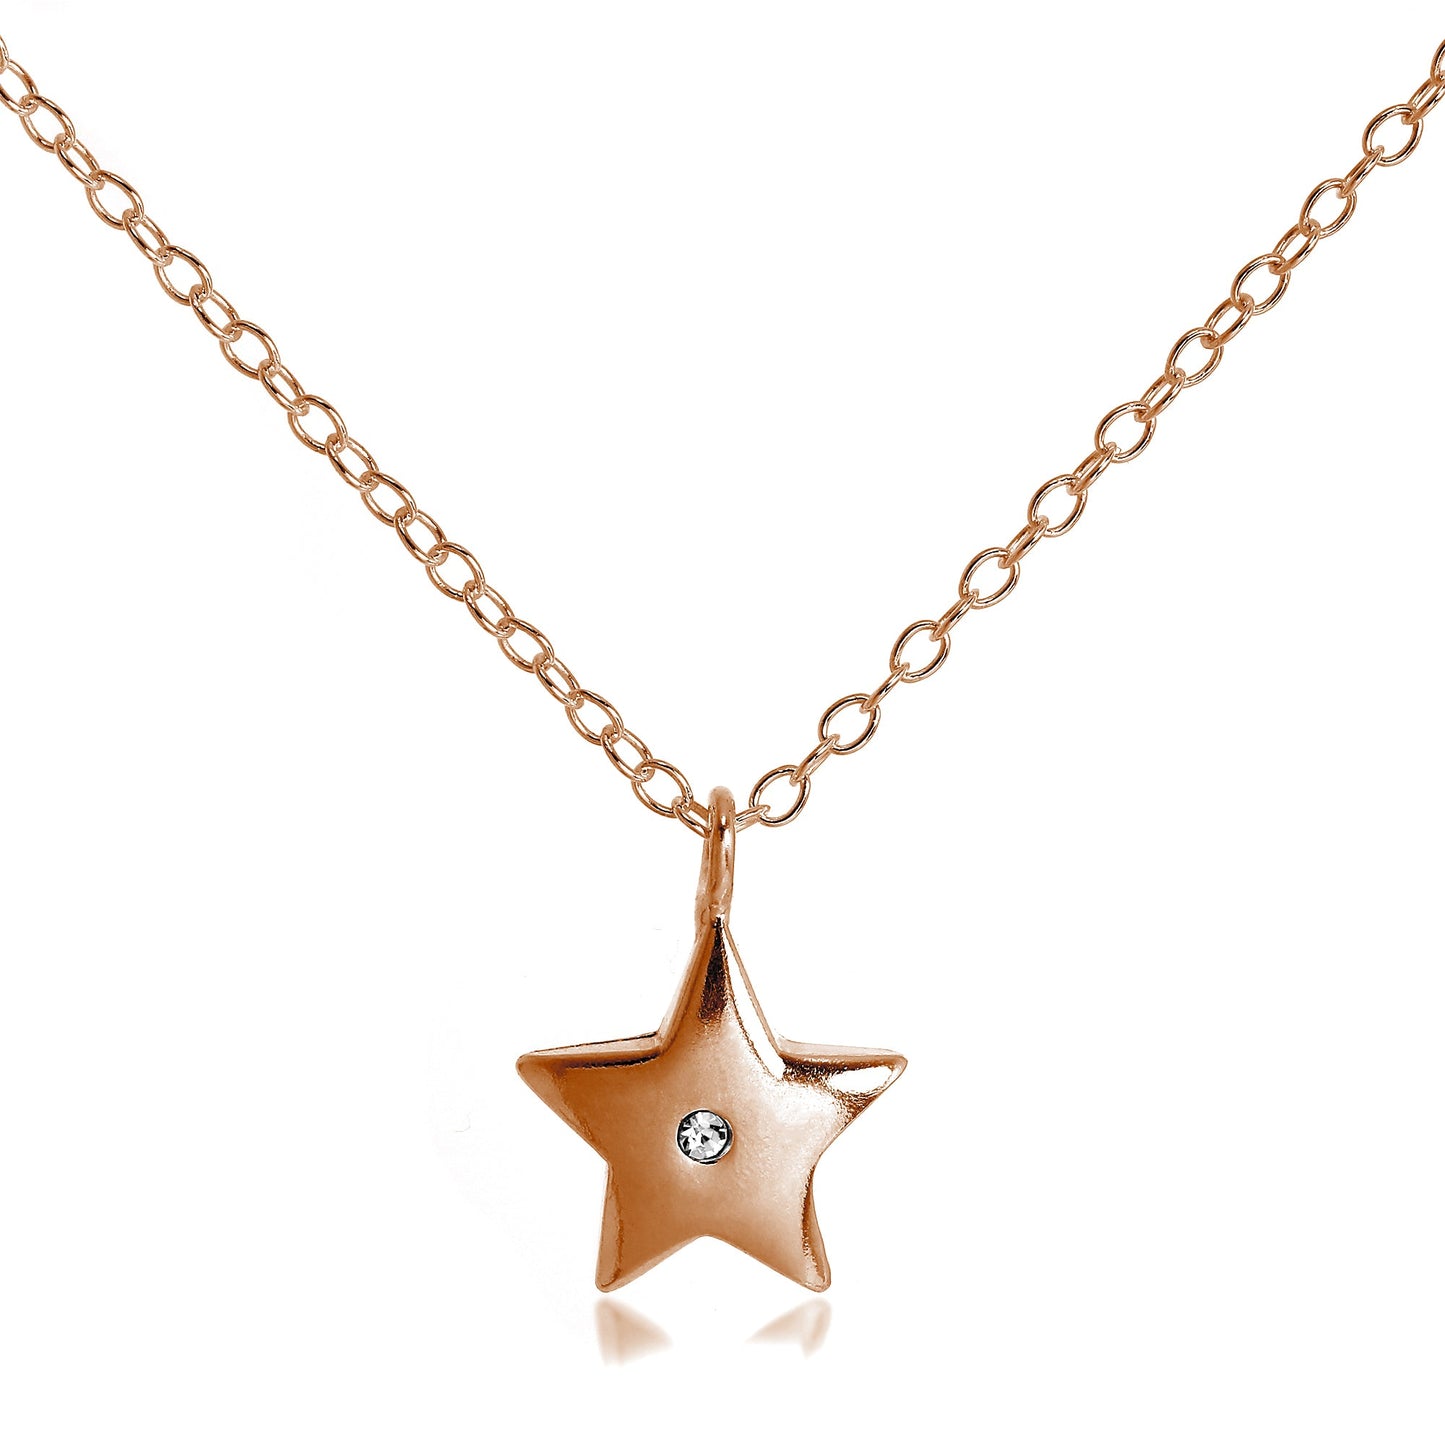 Rose Gold Plated Sterling Silver & CZ Star Necklace 18 Inch